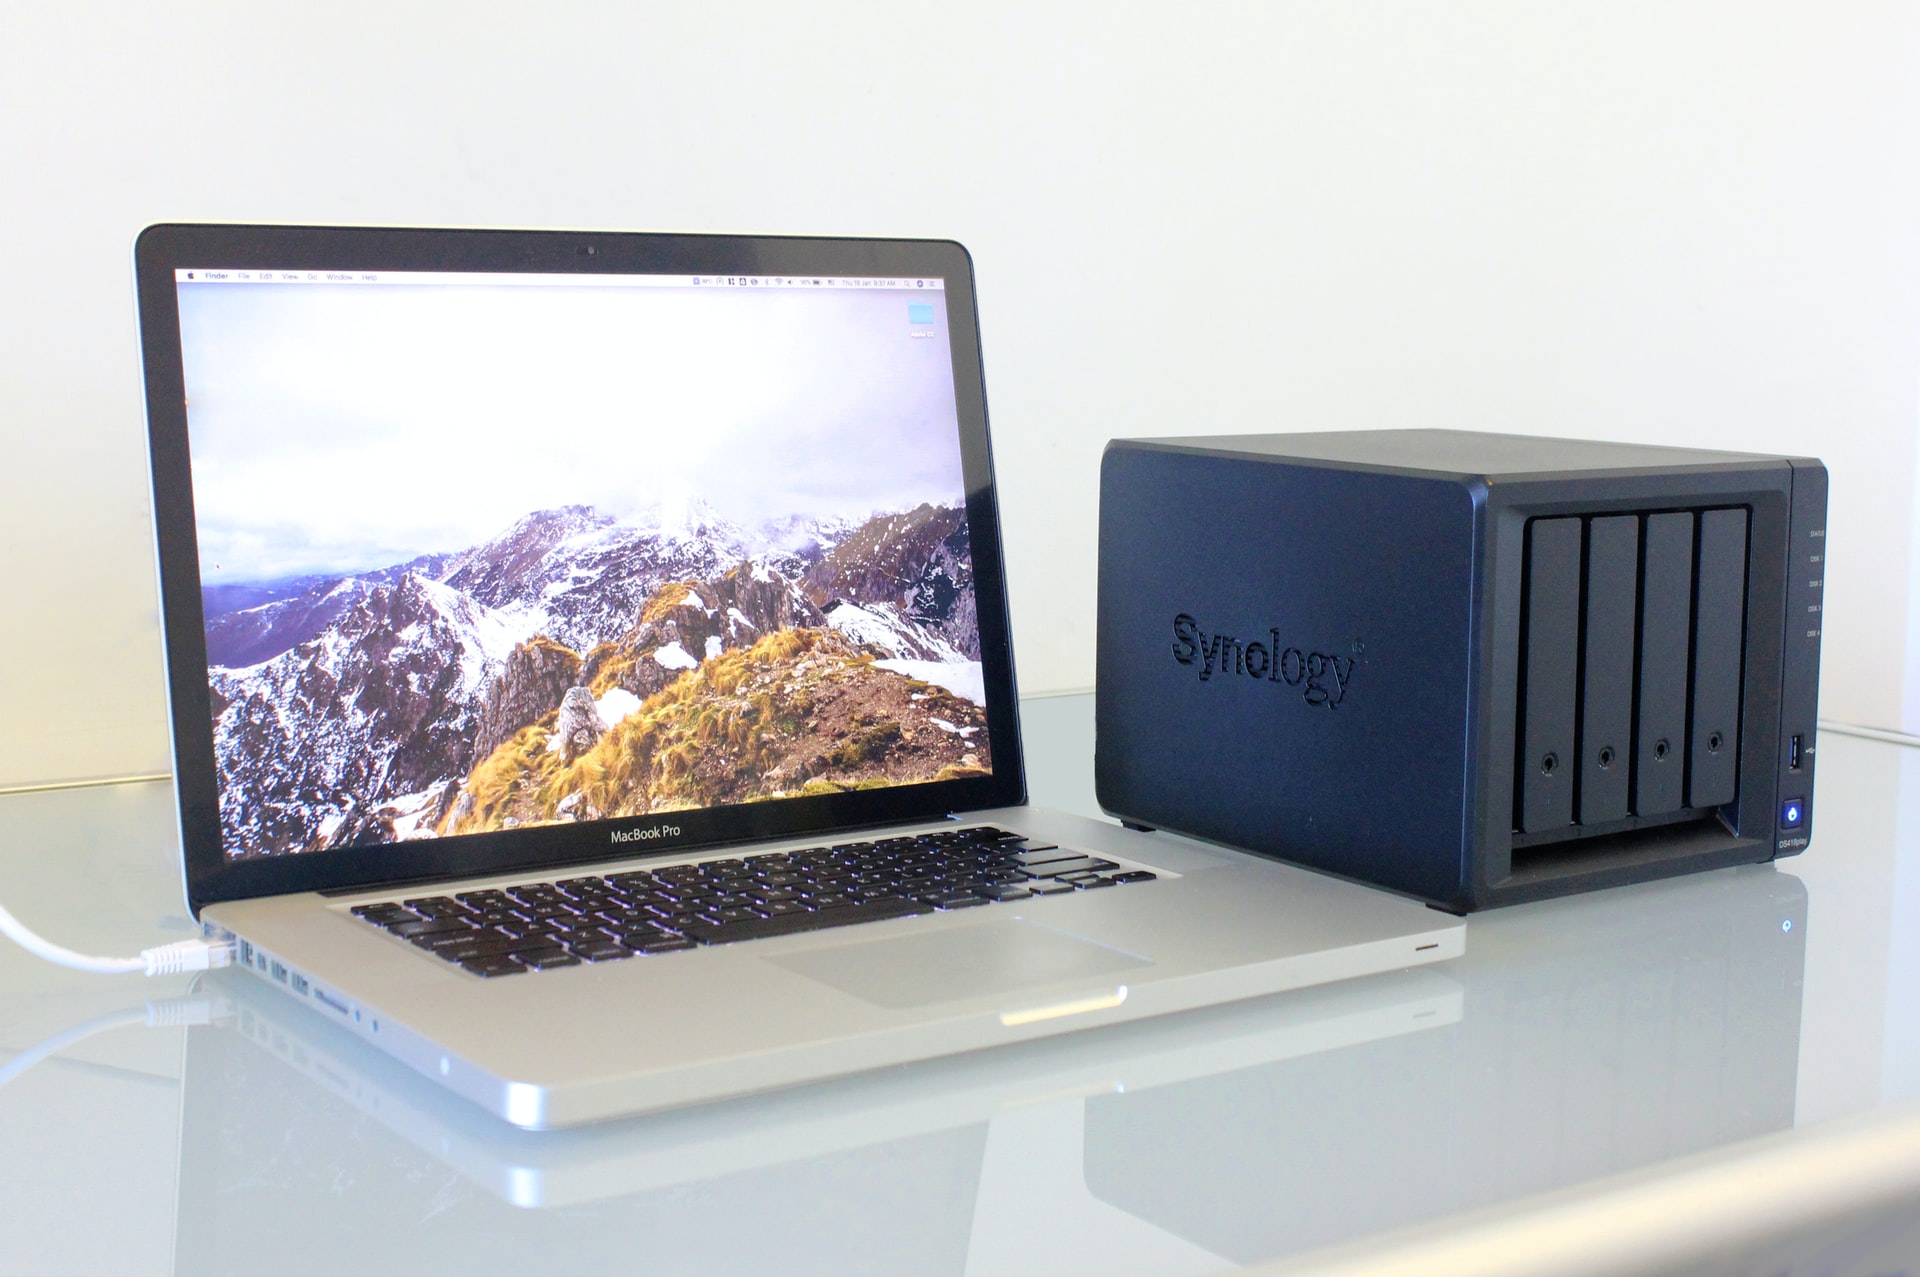 4-drive Synology NAS. Photo by Alex Cheung.